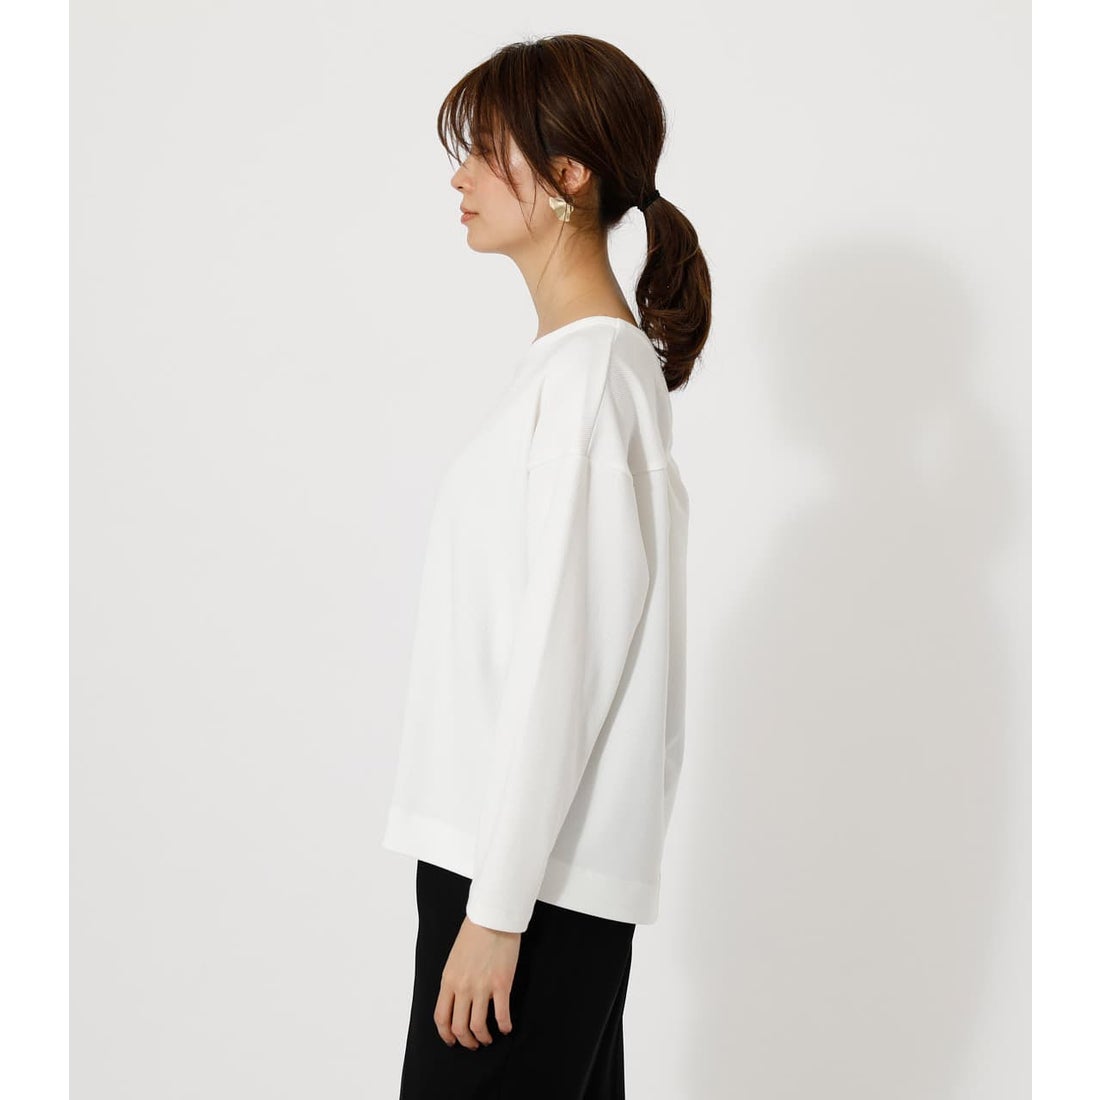 AZUL BY MOUSSY BACK TWIST OPEN TOPS L/KHA1 -アウトレット通販 ロコレット (LOCOLET)